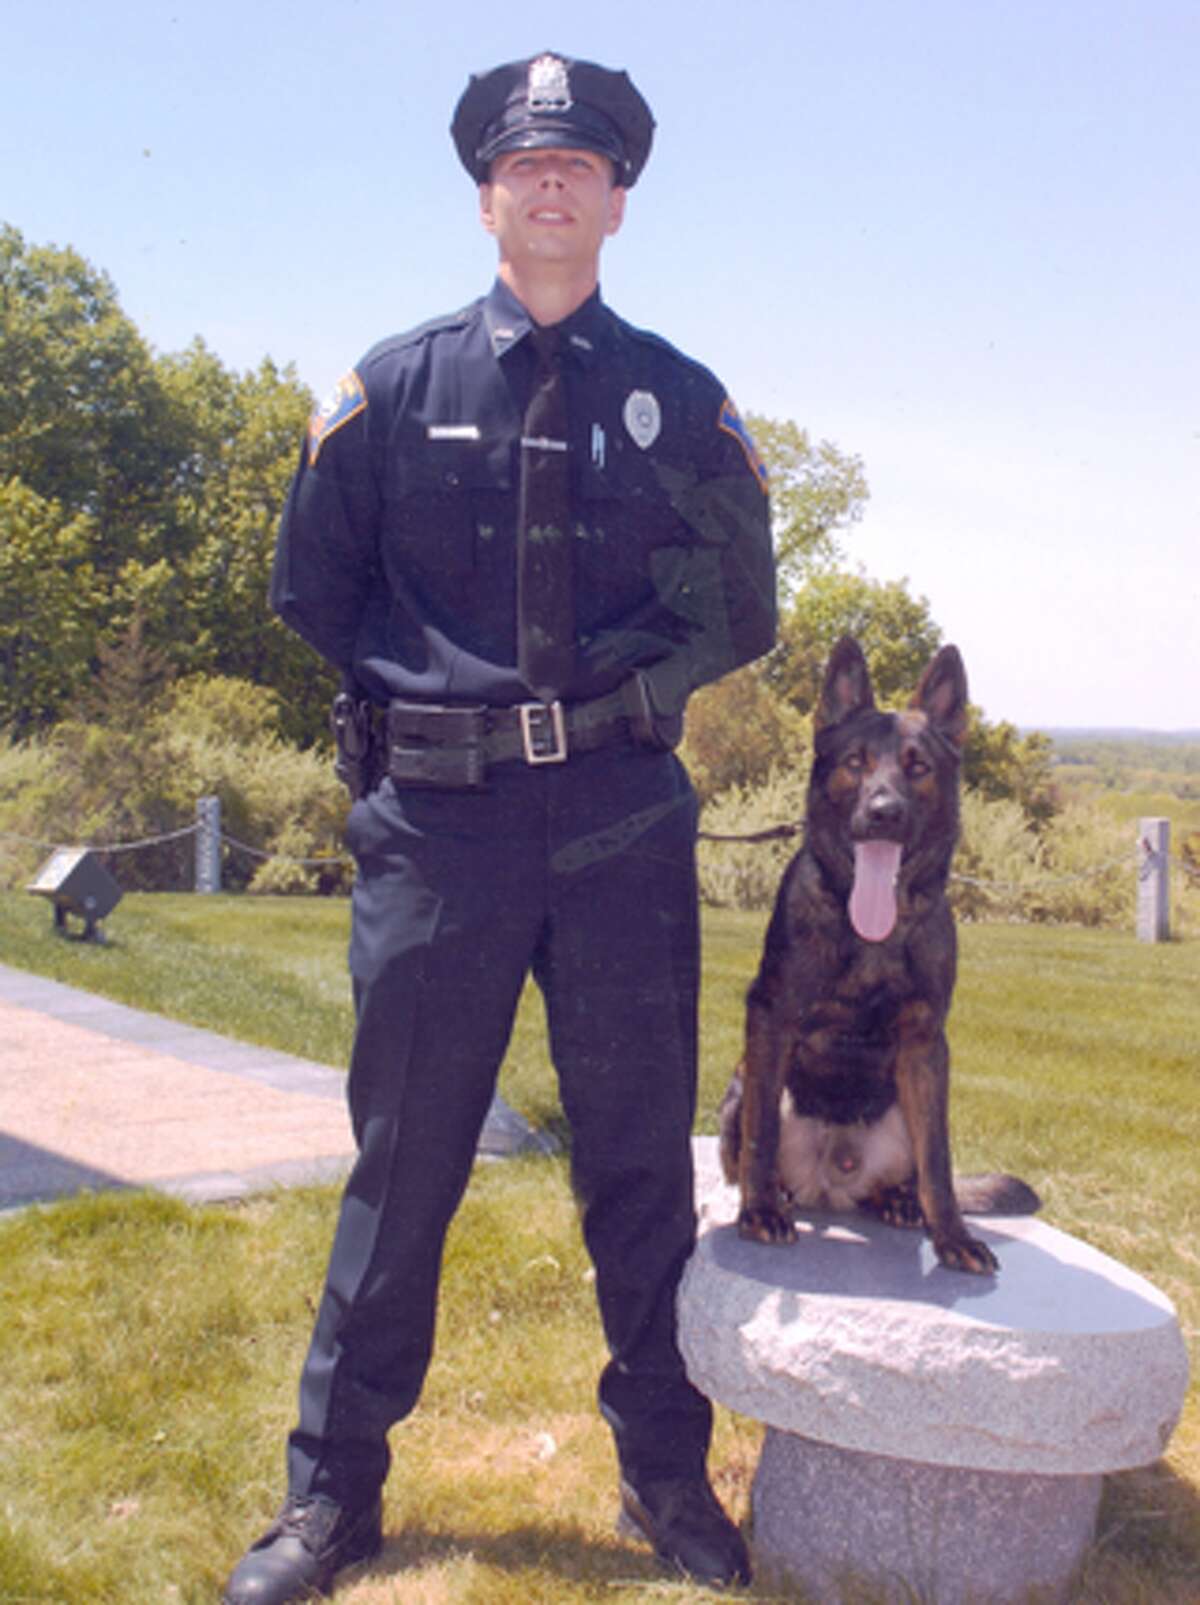 Shelton police officer Christopher Nugent, who is now a detective, with K-9 Jager, who has just retired from the force.